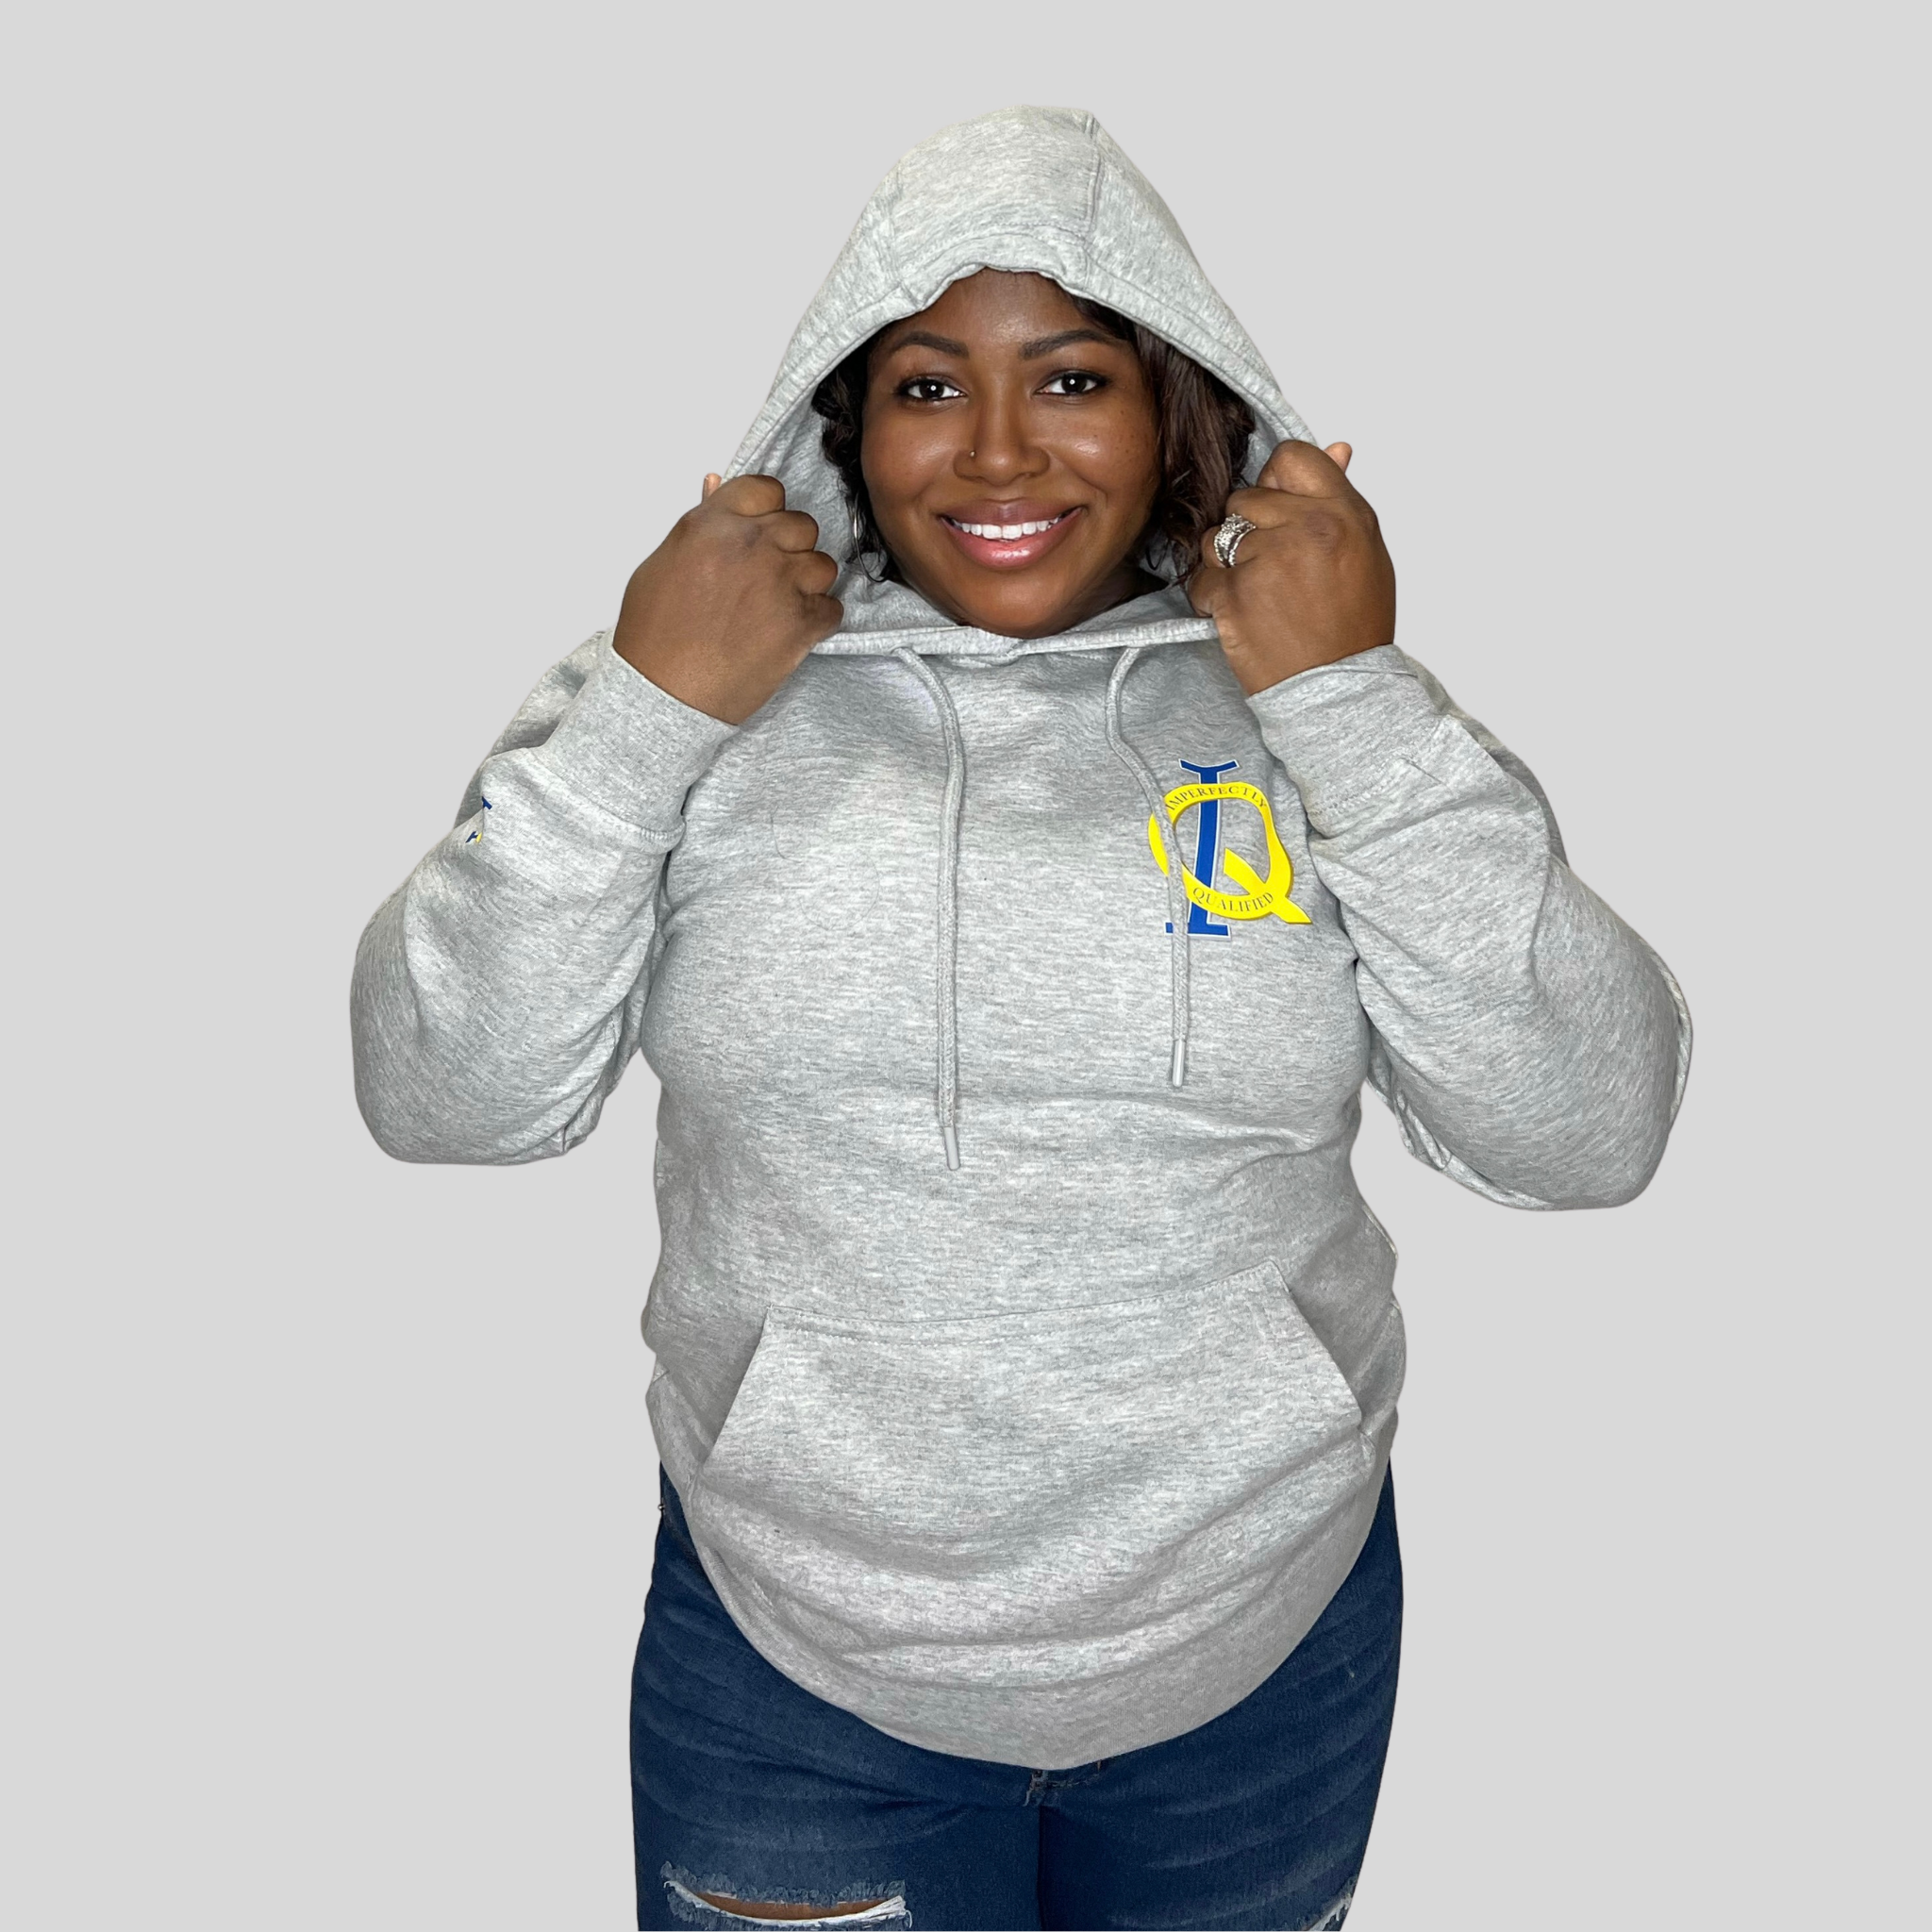 heather gray pullover hoodie